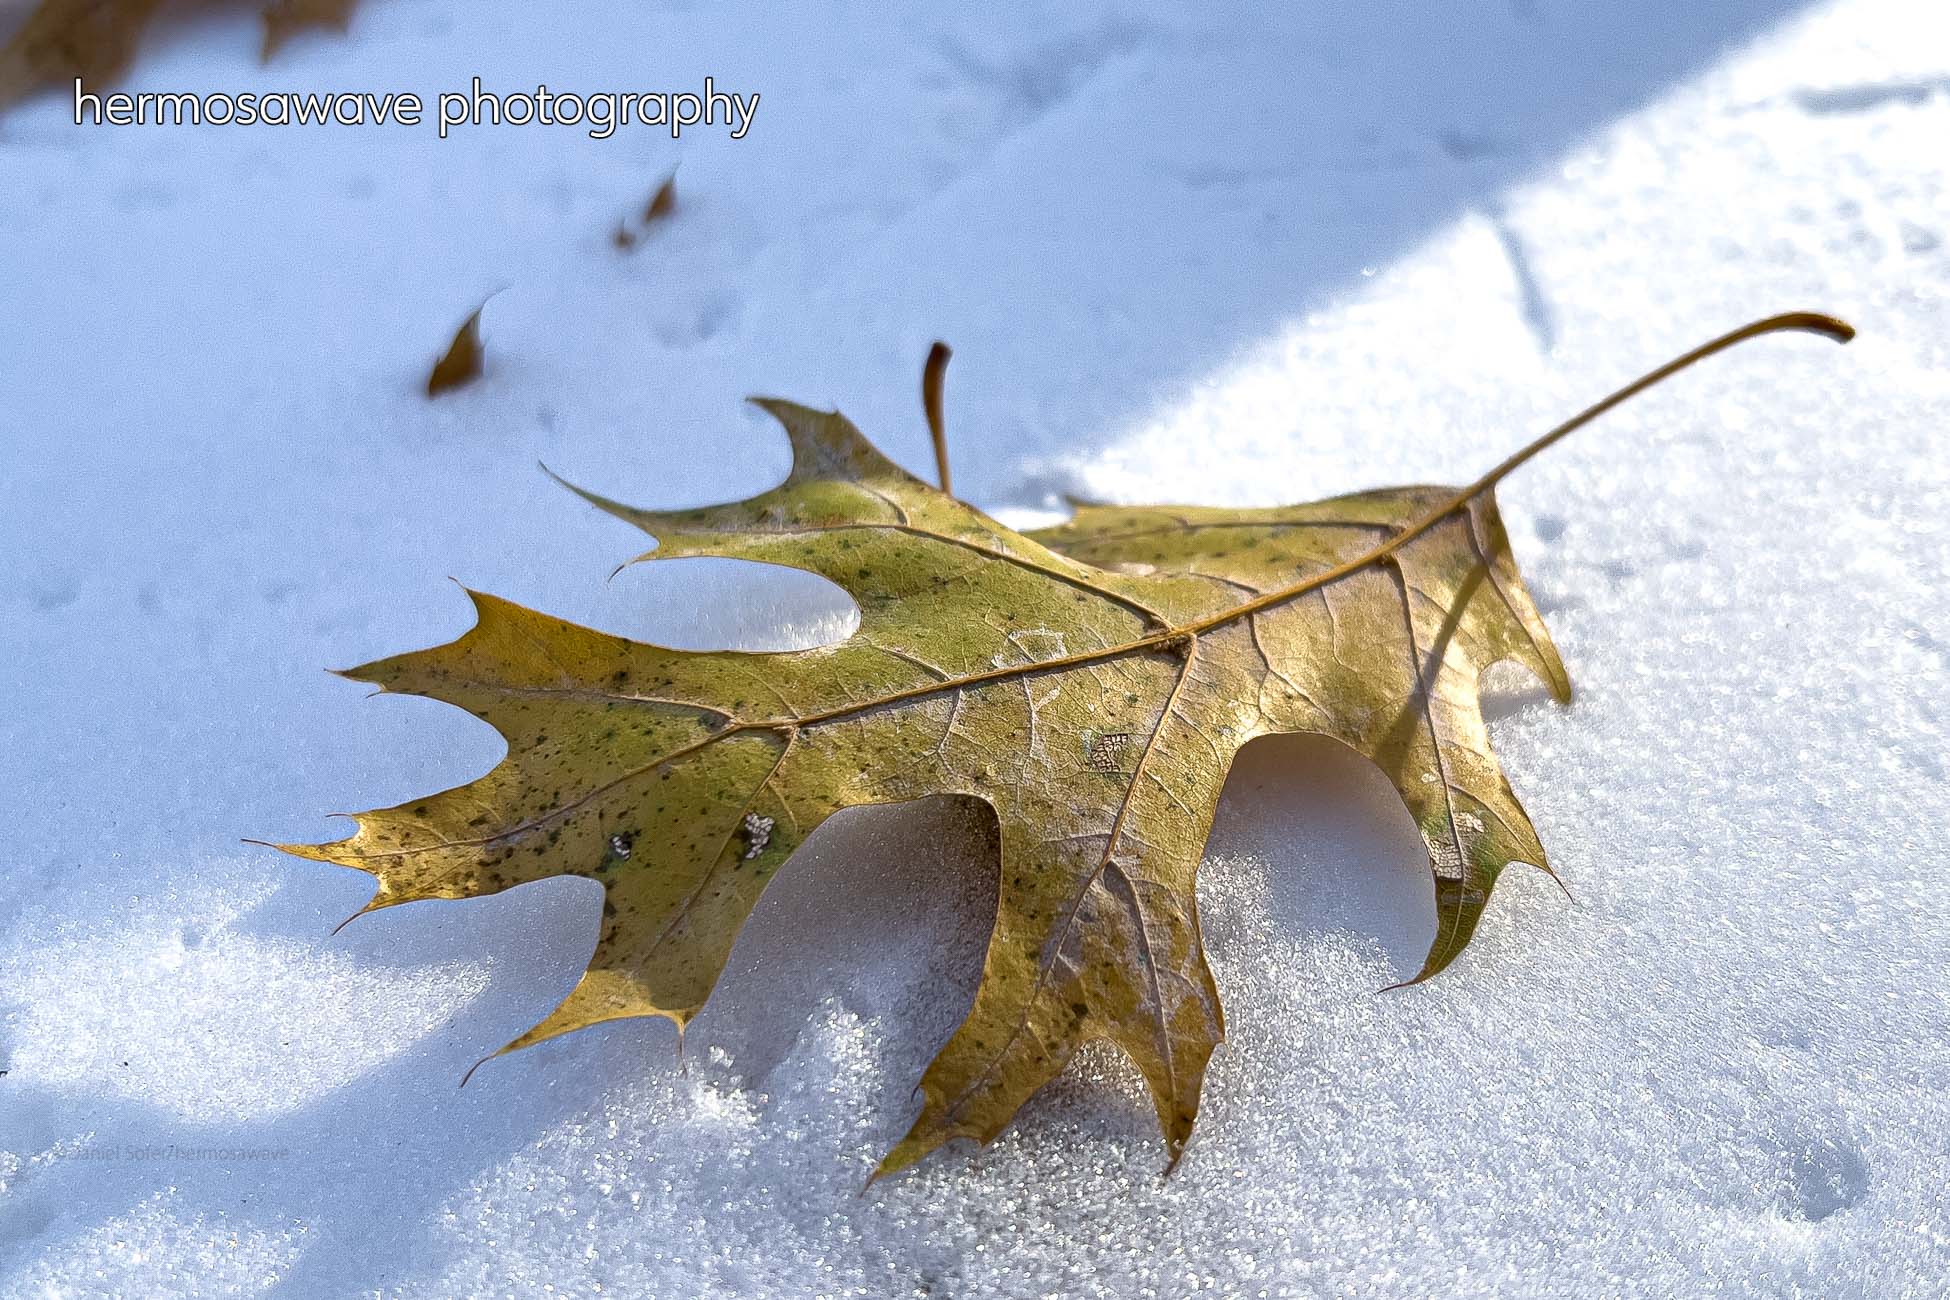 A Leaf in Snow